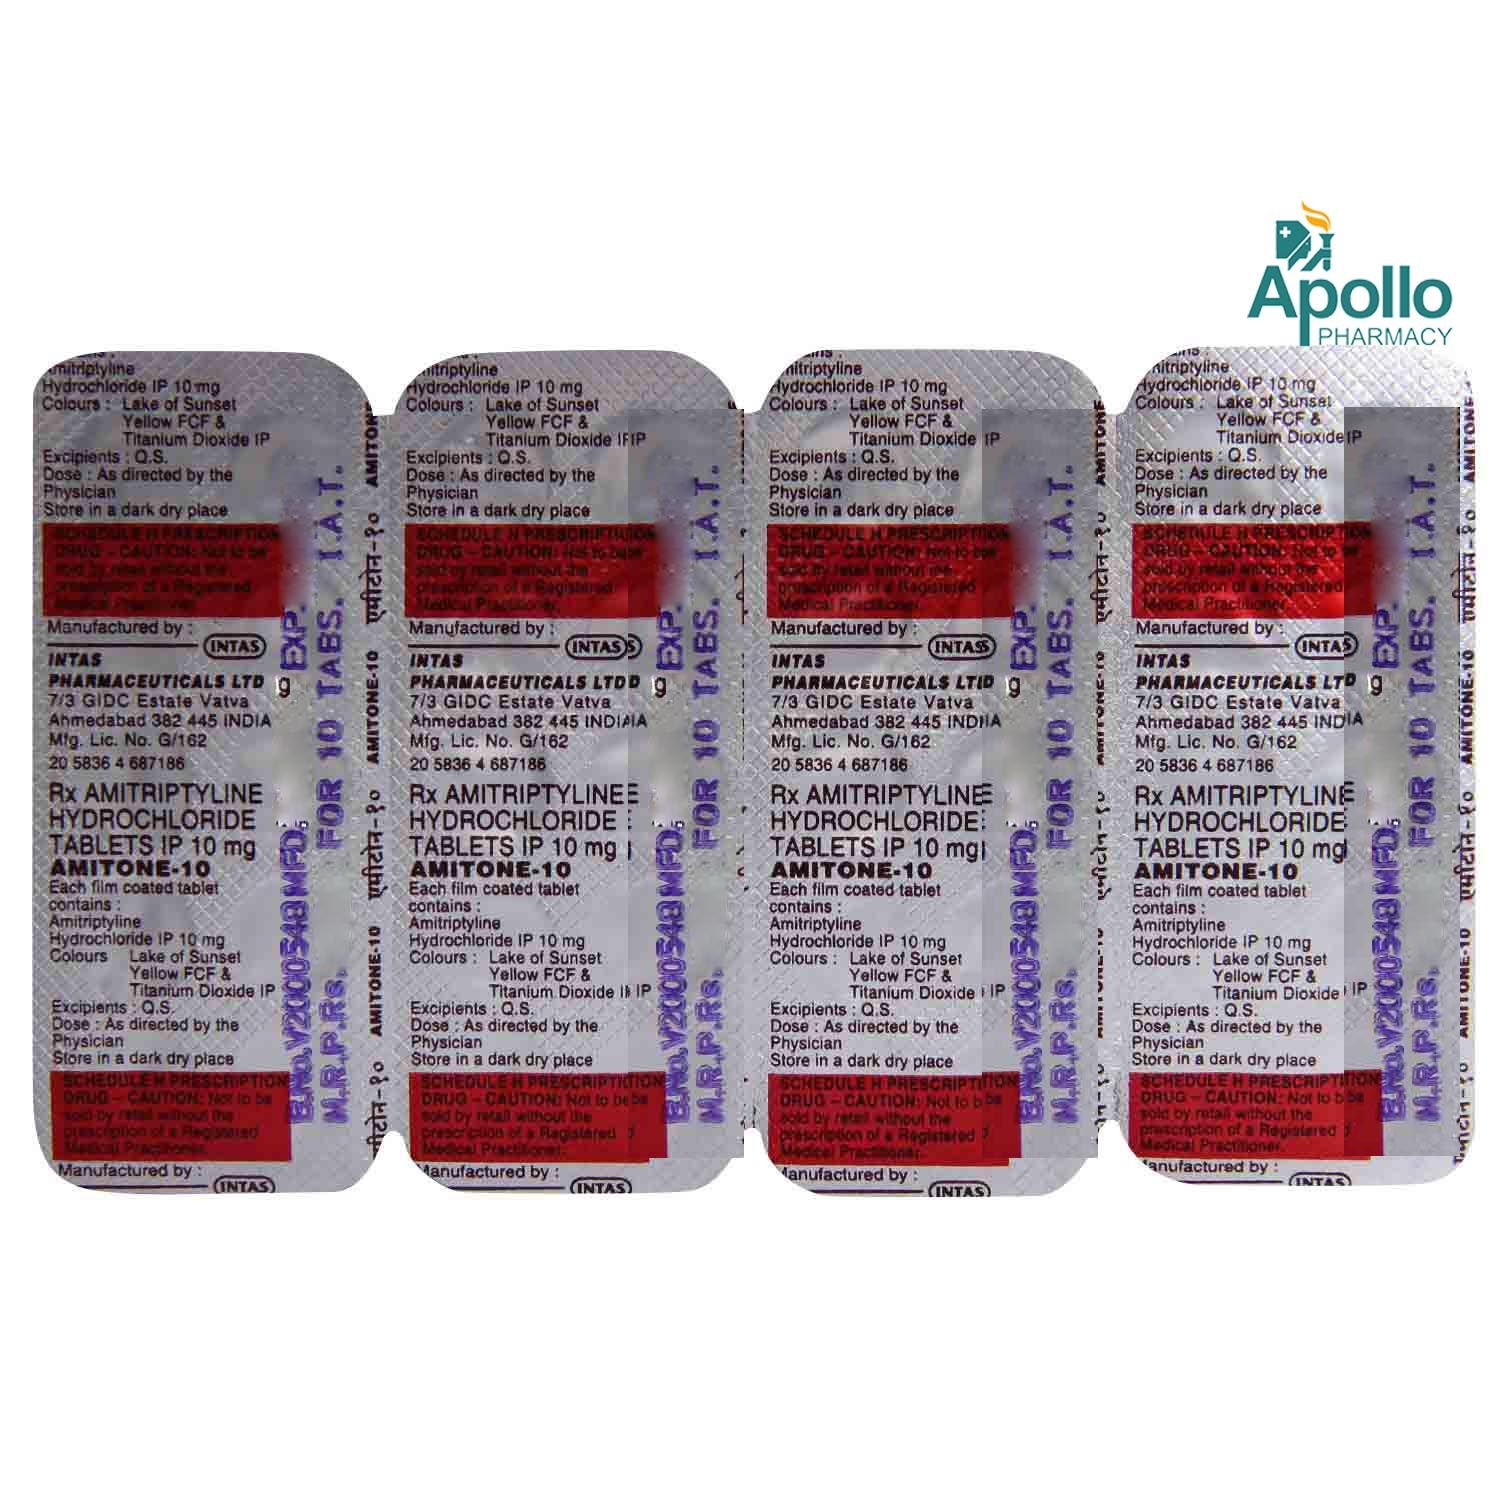 Amitone-10 Tablet 10's, Pack of 10 TABLETS